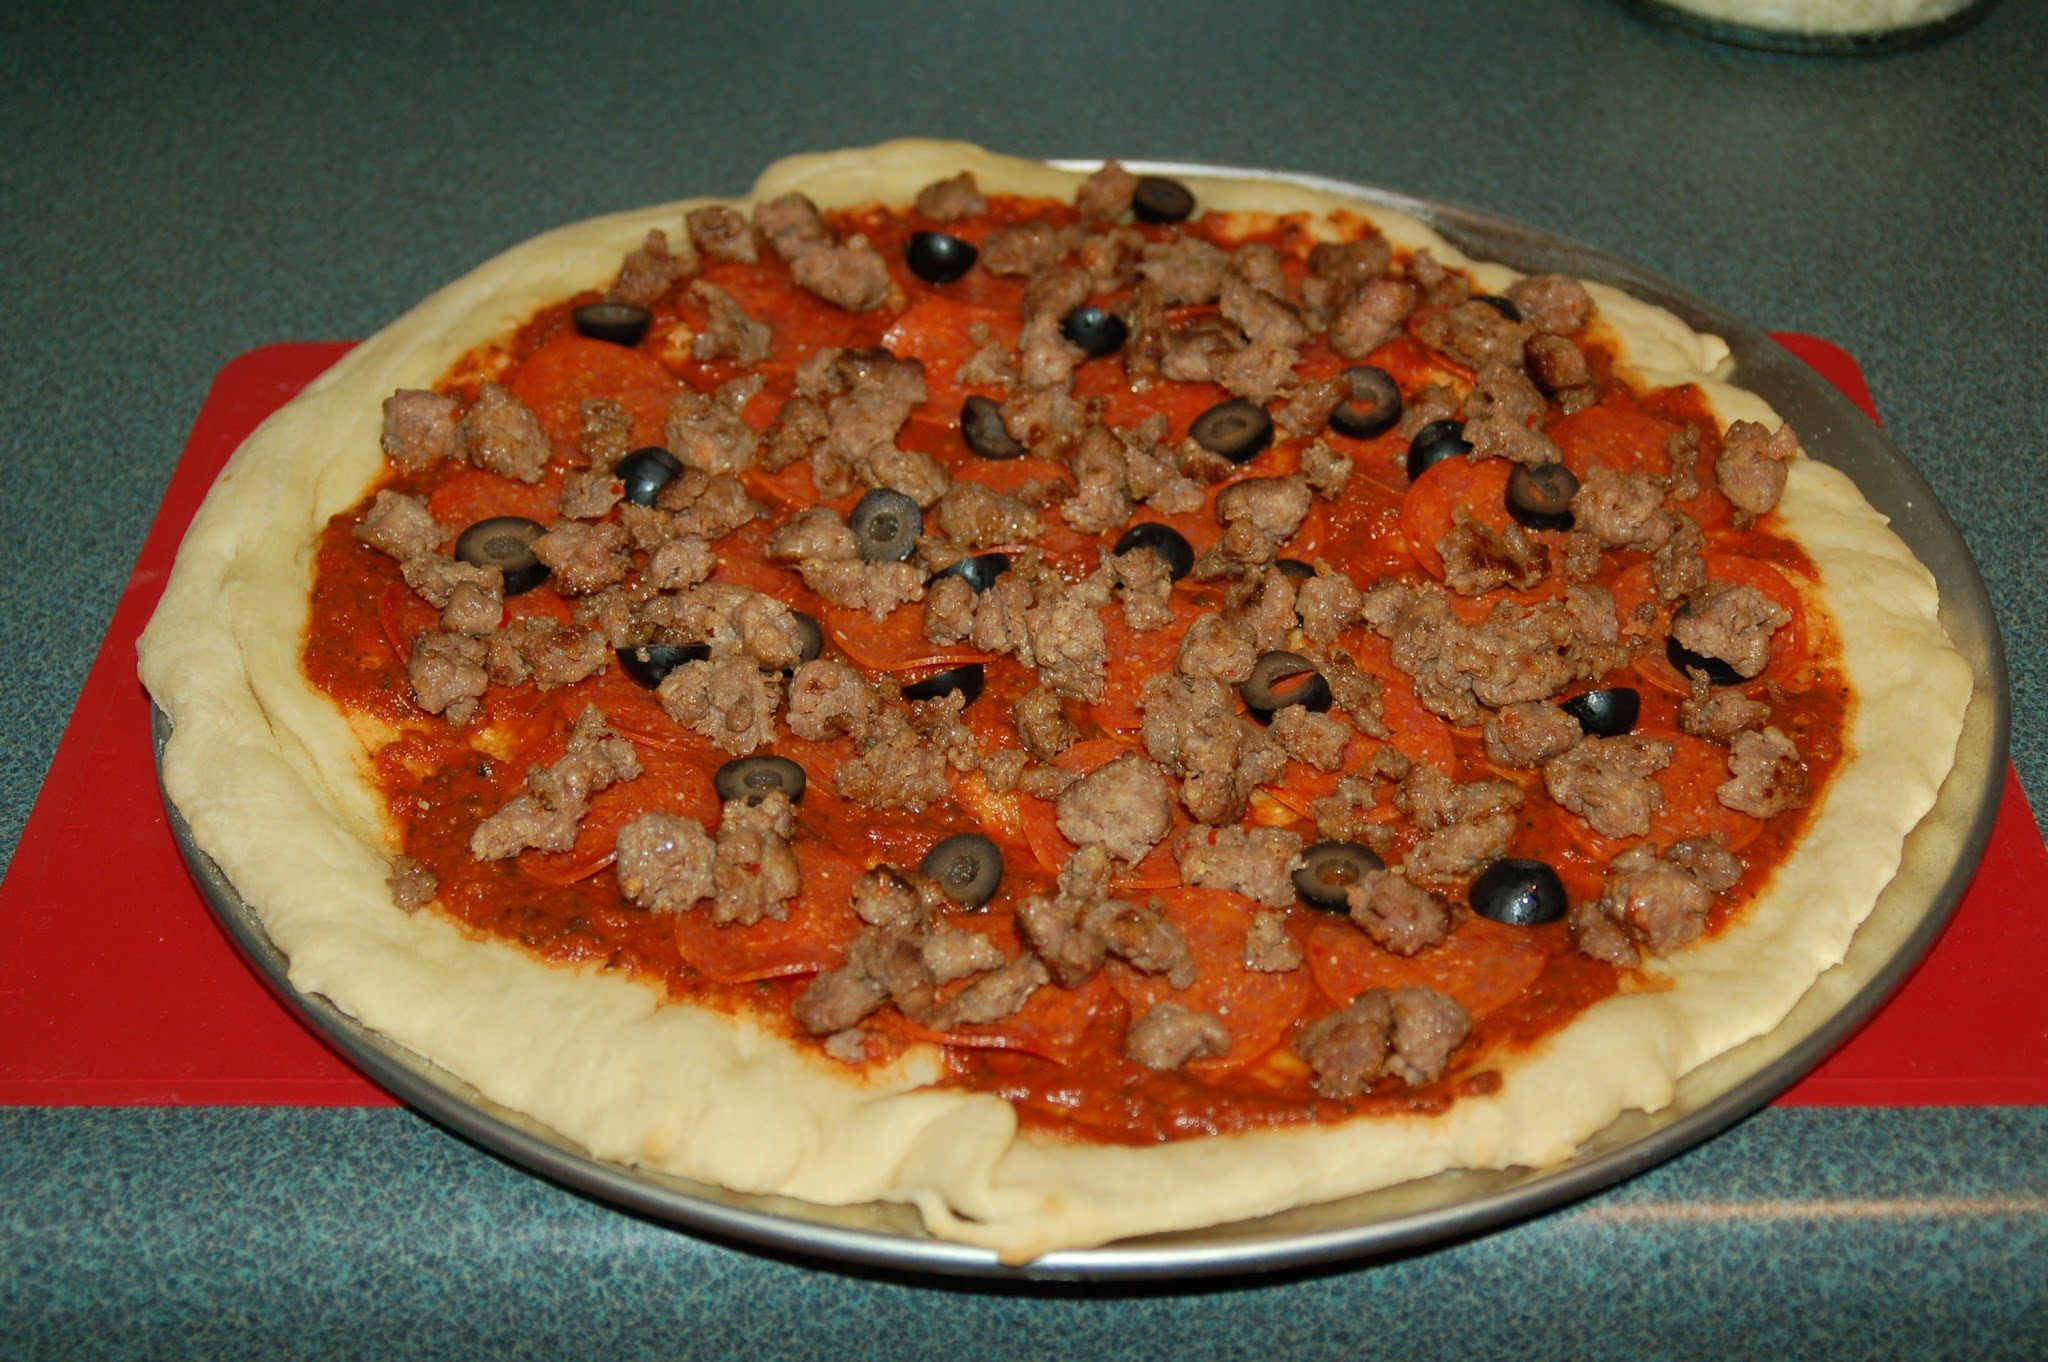 pizza with sausage and ground beef, ready to bake